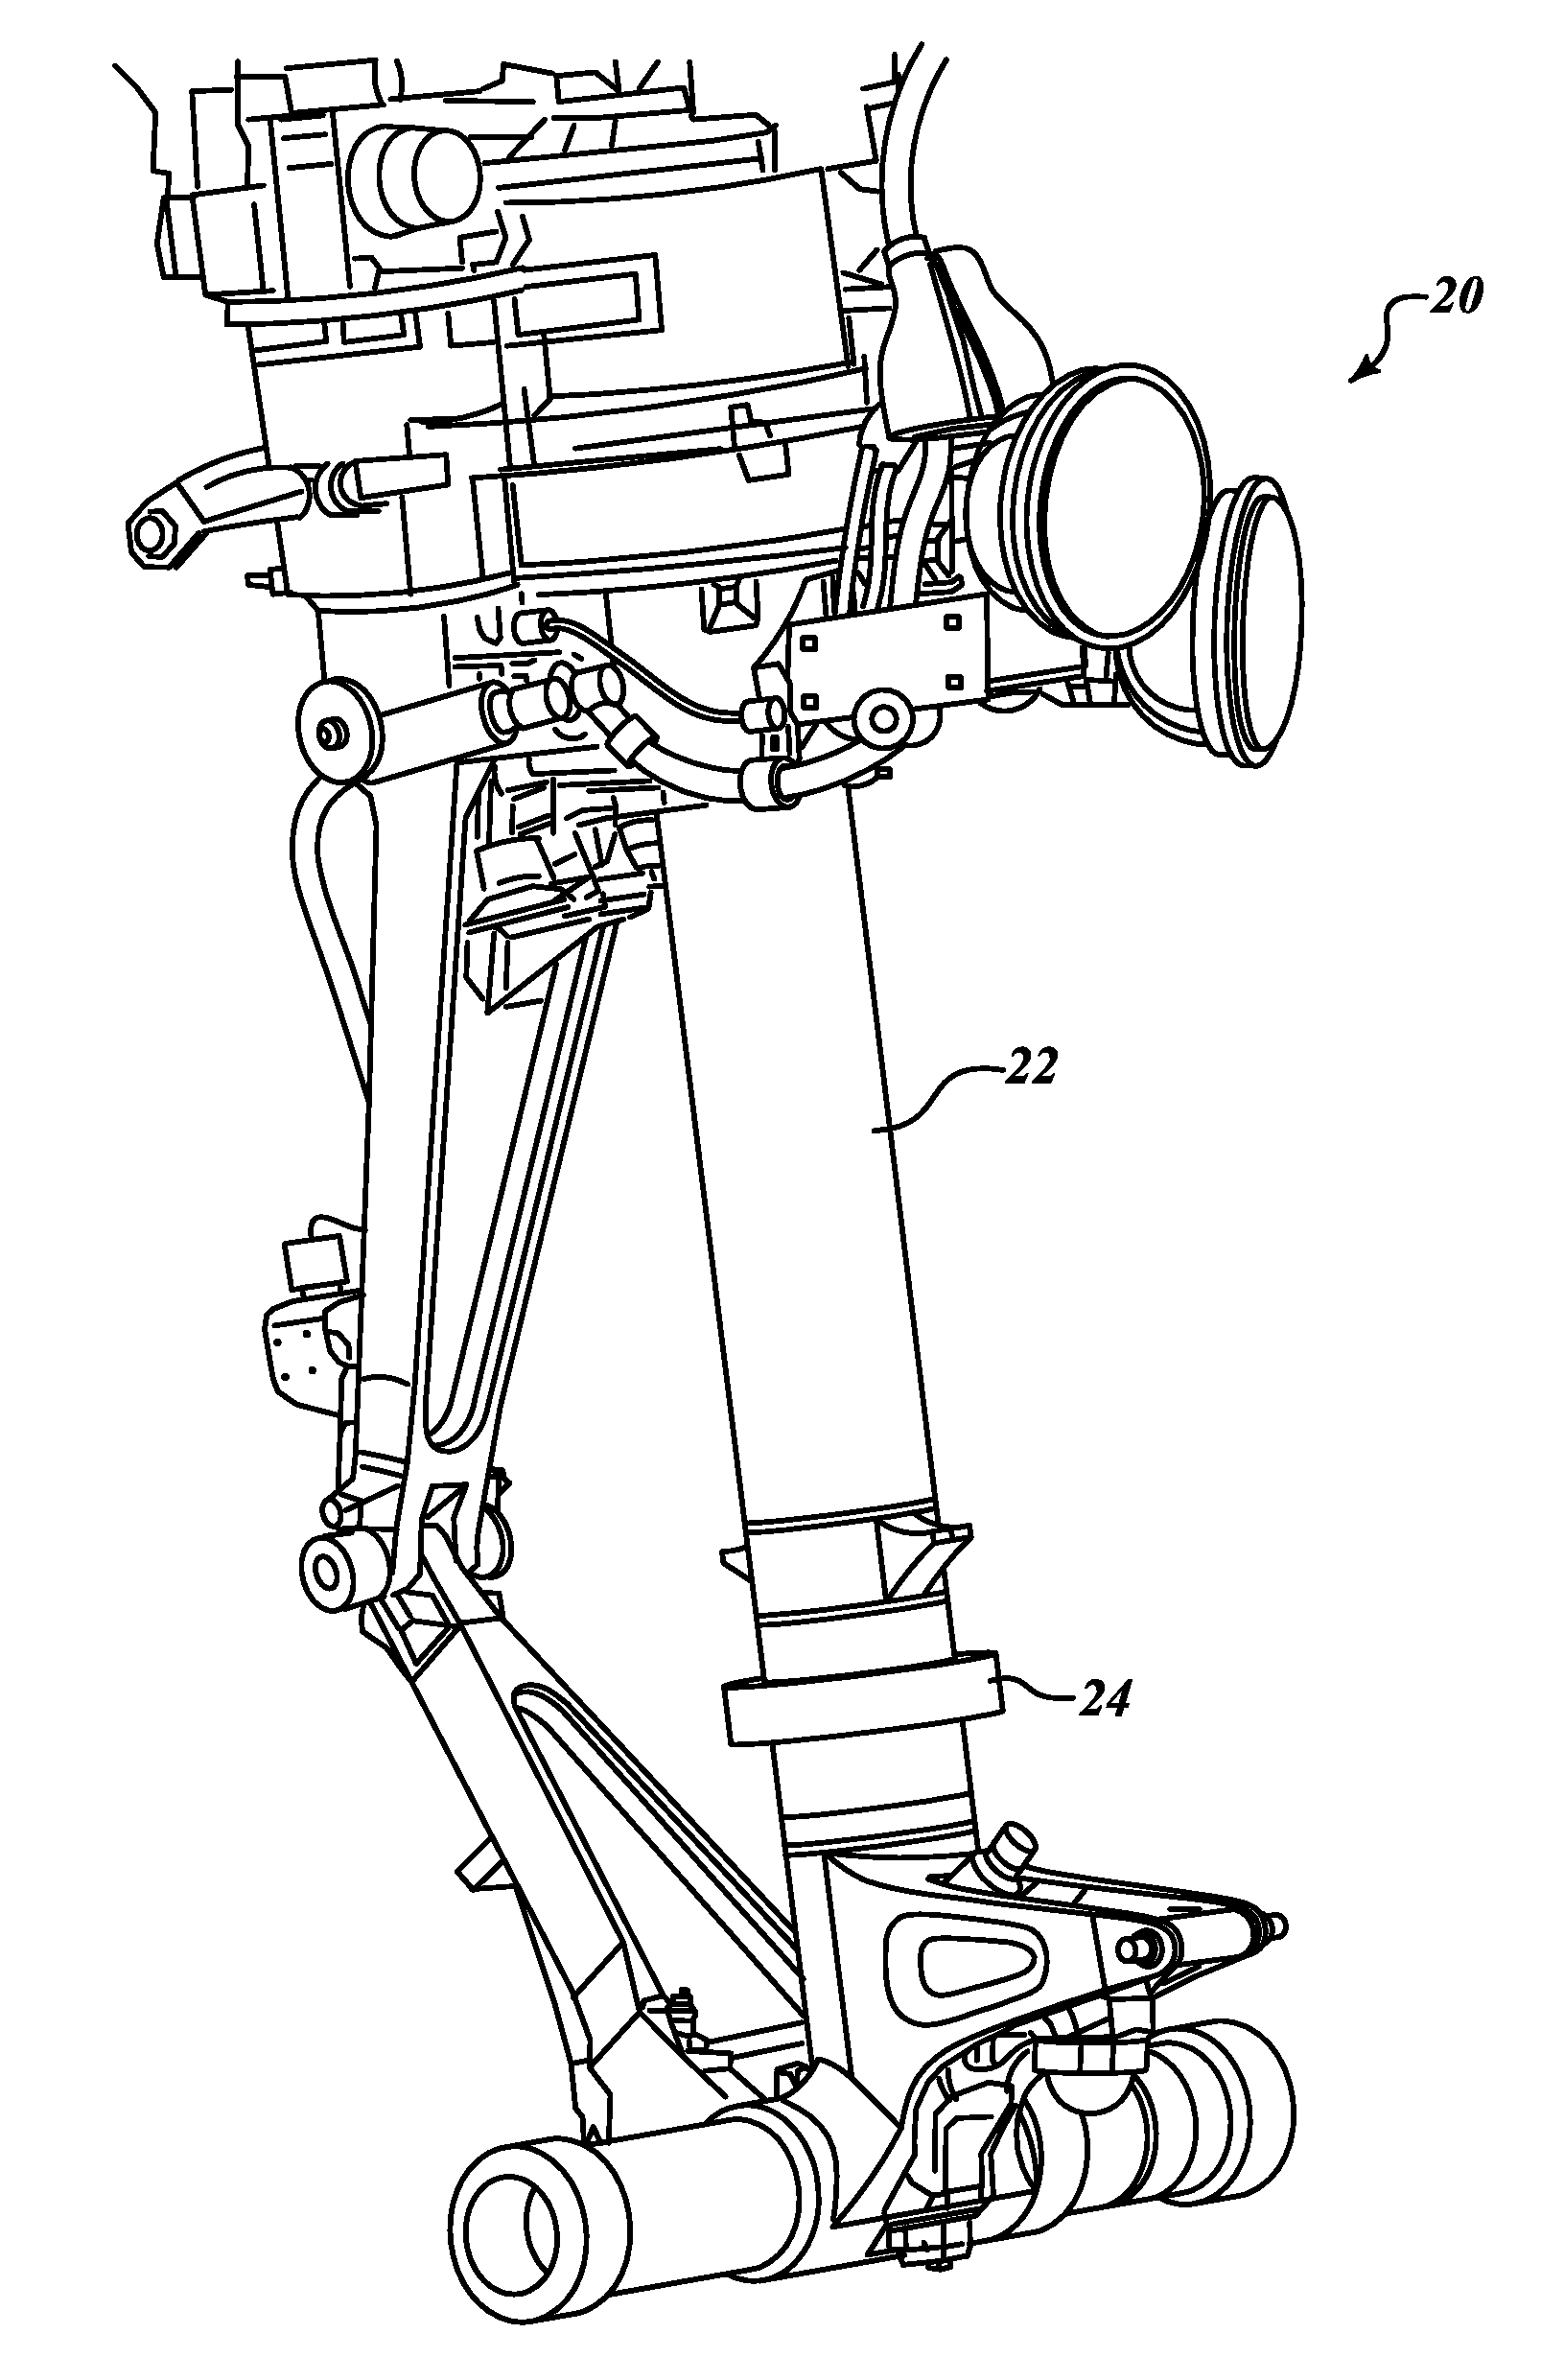 Systems and methods for mounting landing gear strain sensors